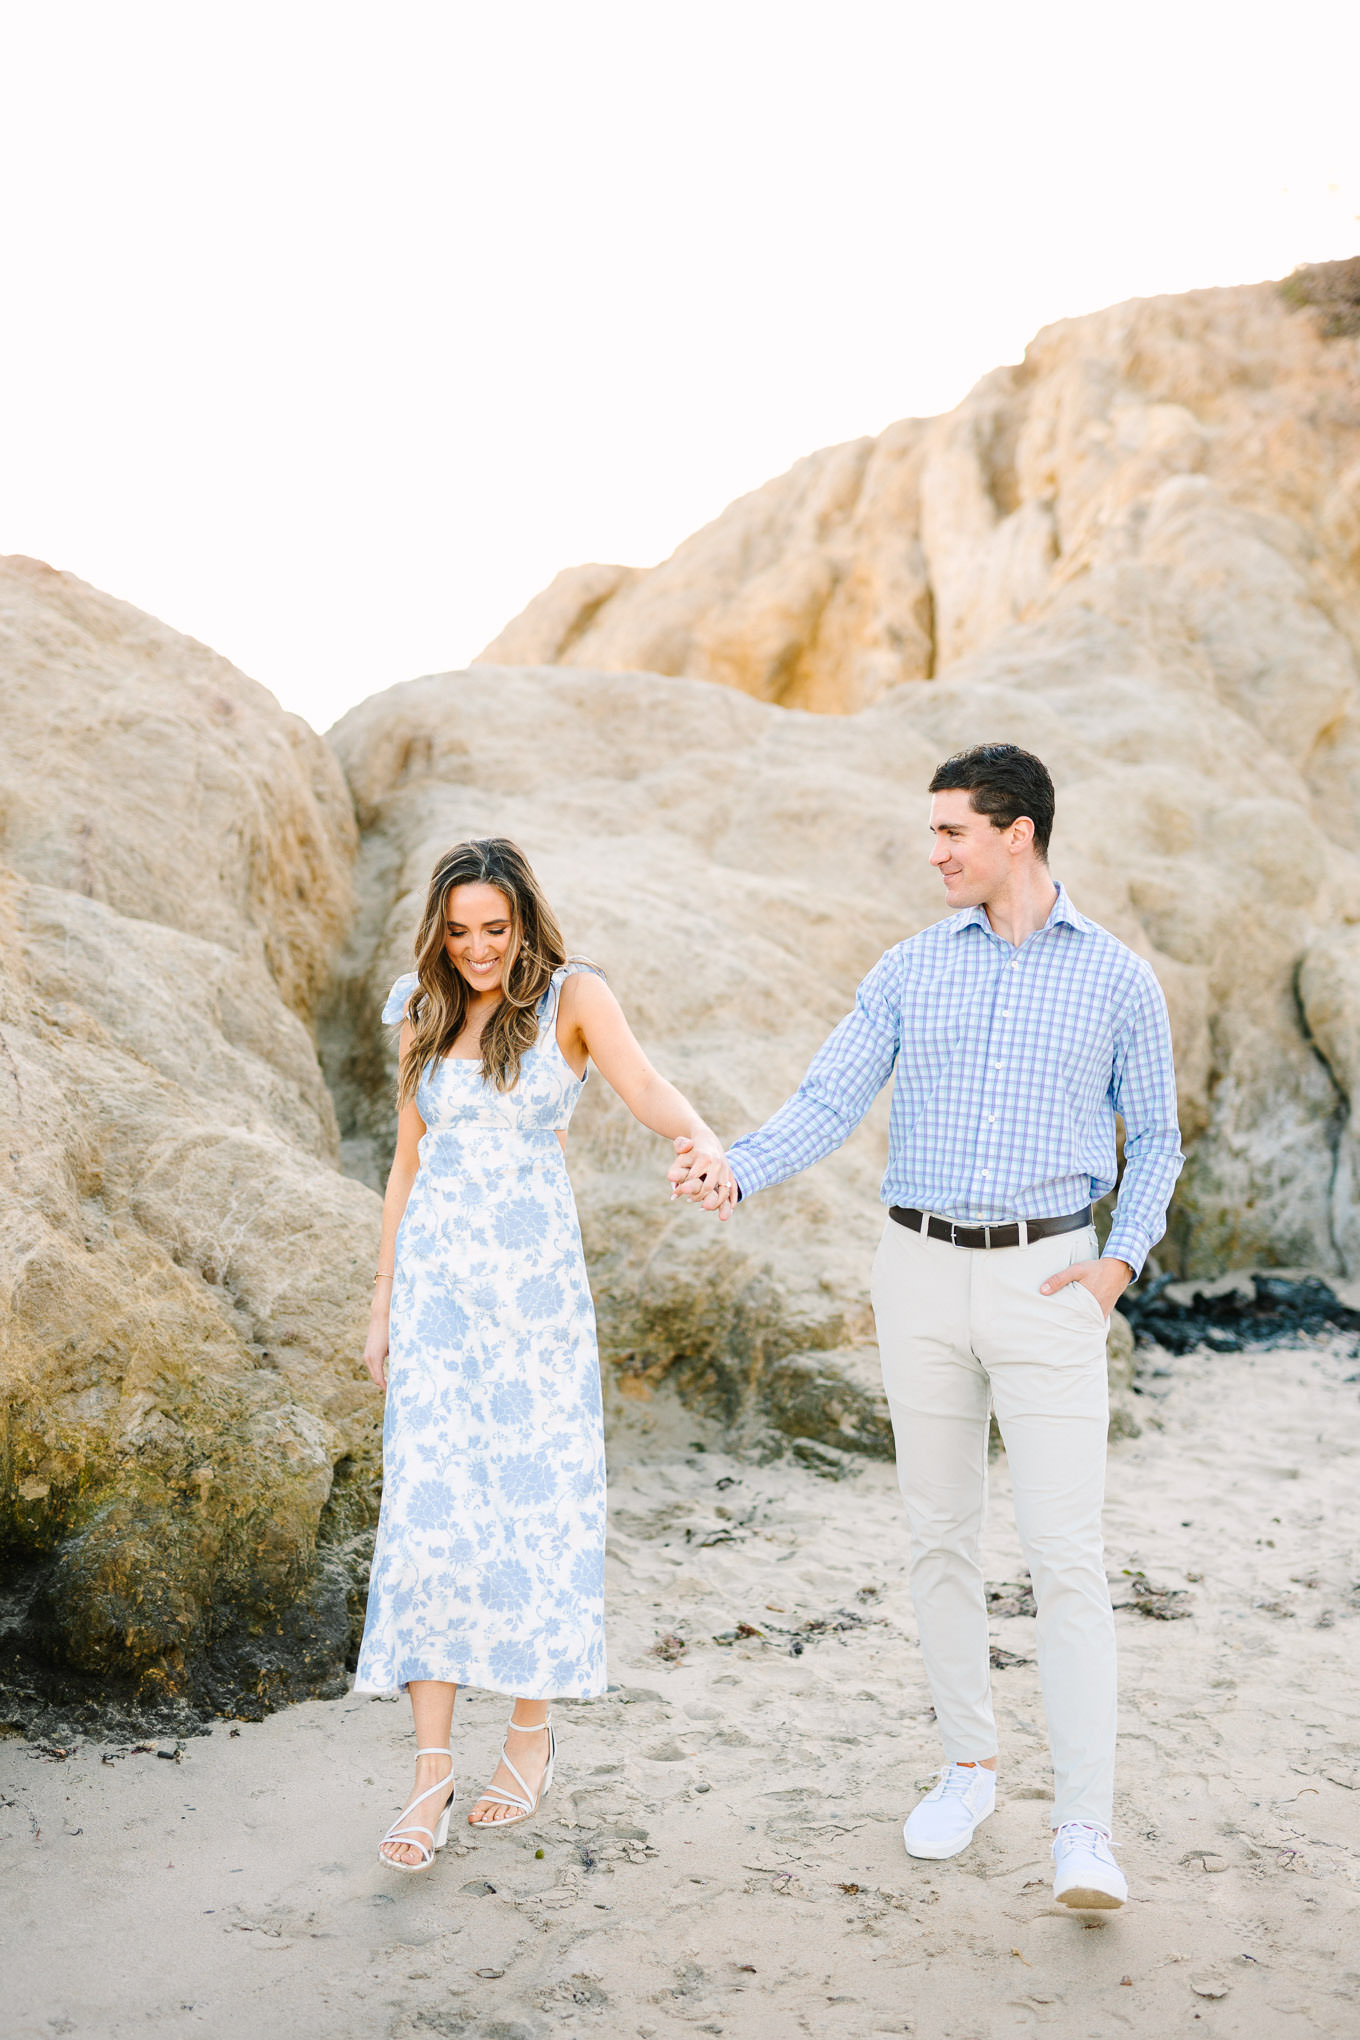 Malibu beach sunset engagement session | Wedding and elopement photography roundup | Los Angeles and Palm Springs photographer | #losangeleswedding #palmspringswedding #elopementphotographer Source: Mary Costa Photography | Los Angeles